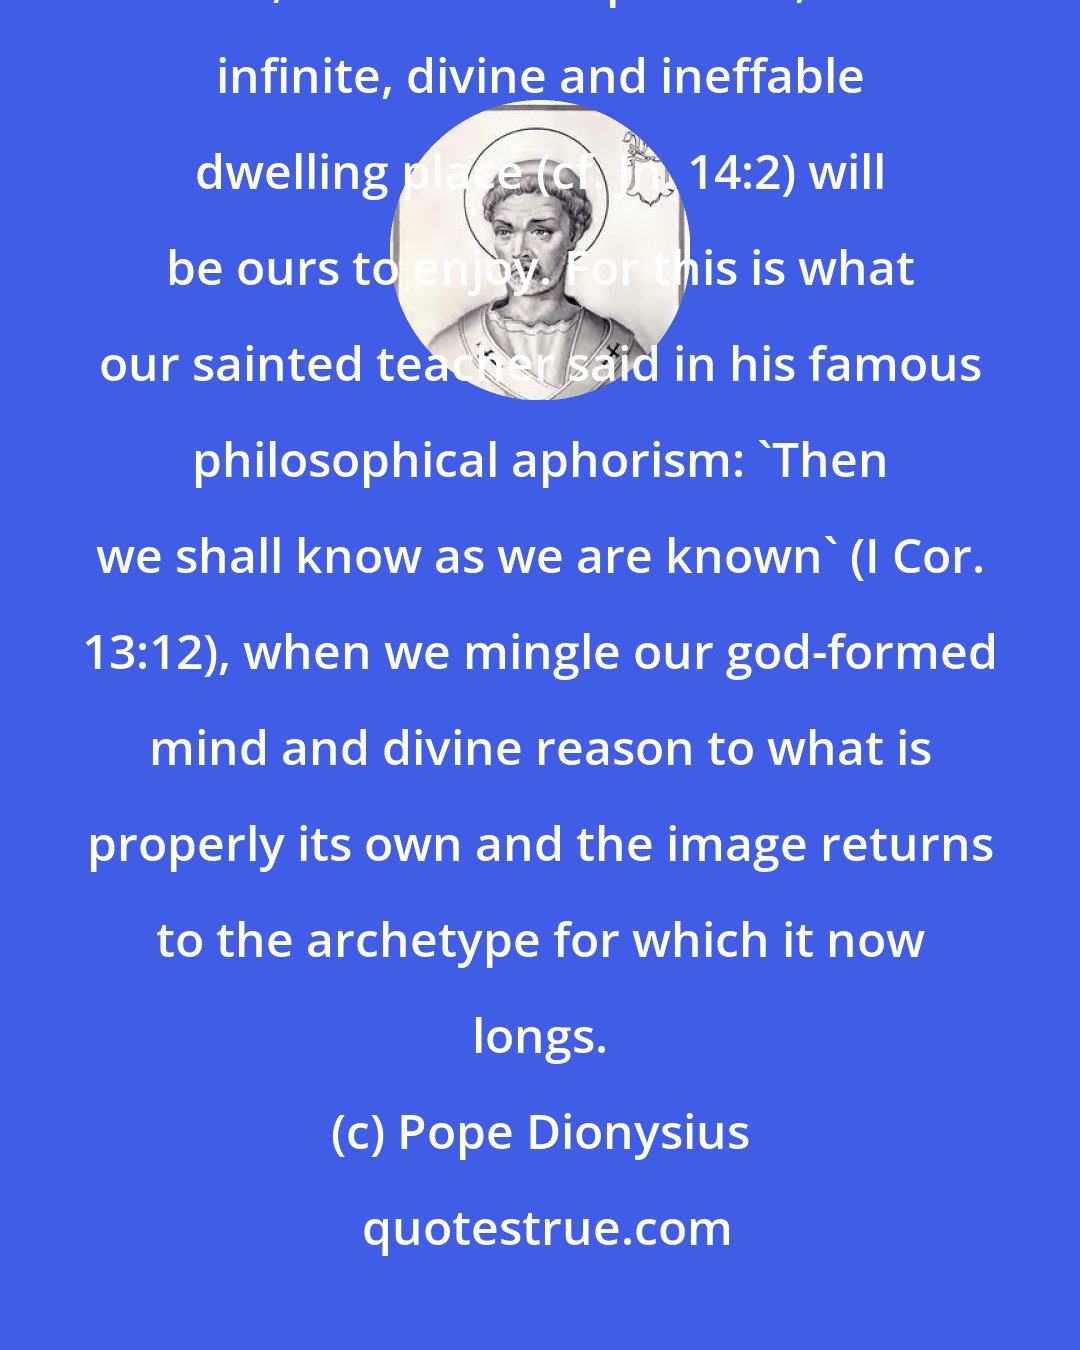 Pope Dionysius: ...if we know God our knowledge of... everything will be brought to perfection, and, in so far as is possible, the infinite, divine and ineffable dwelling place (cf. Jn. 14:2) will be ours to enjoy. For this is what our sainted teacher said in his famous philosophical aphorism: 'Then we shall know as we are known' (I Cor. 13:12), when we mingle our god-formed mind and divine reason to what is properly its own and the image returns to the archetype for which it now longs.